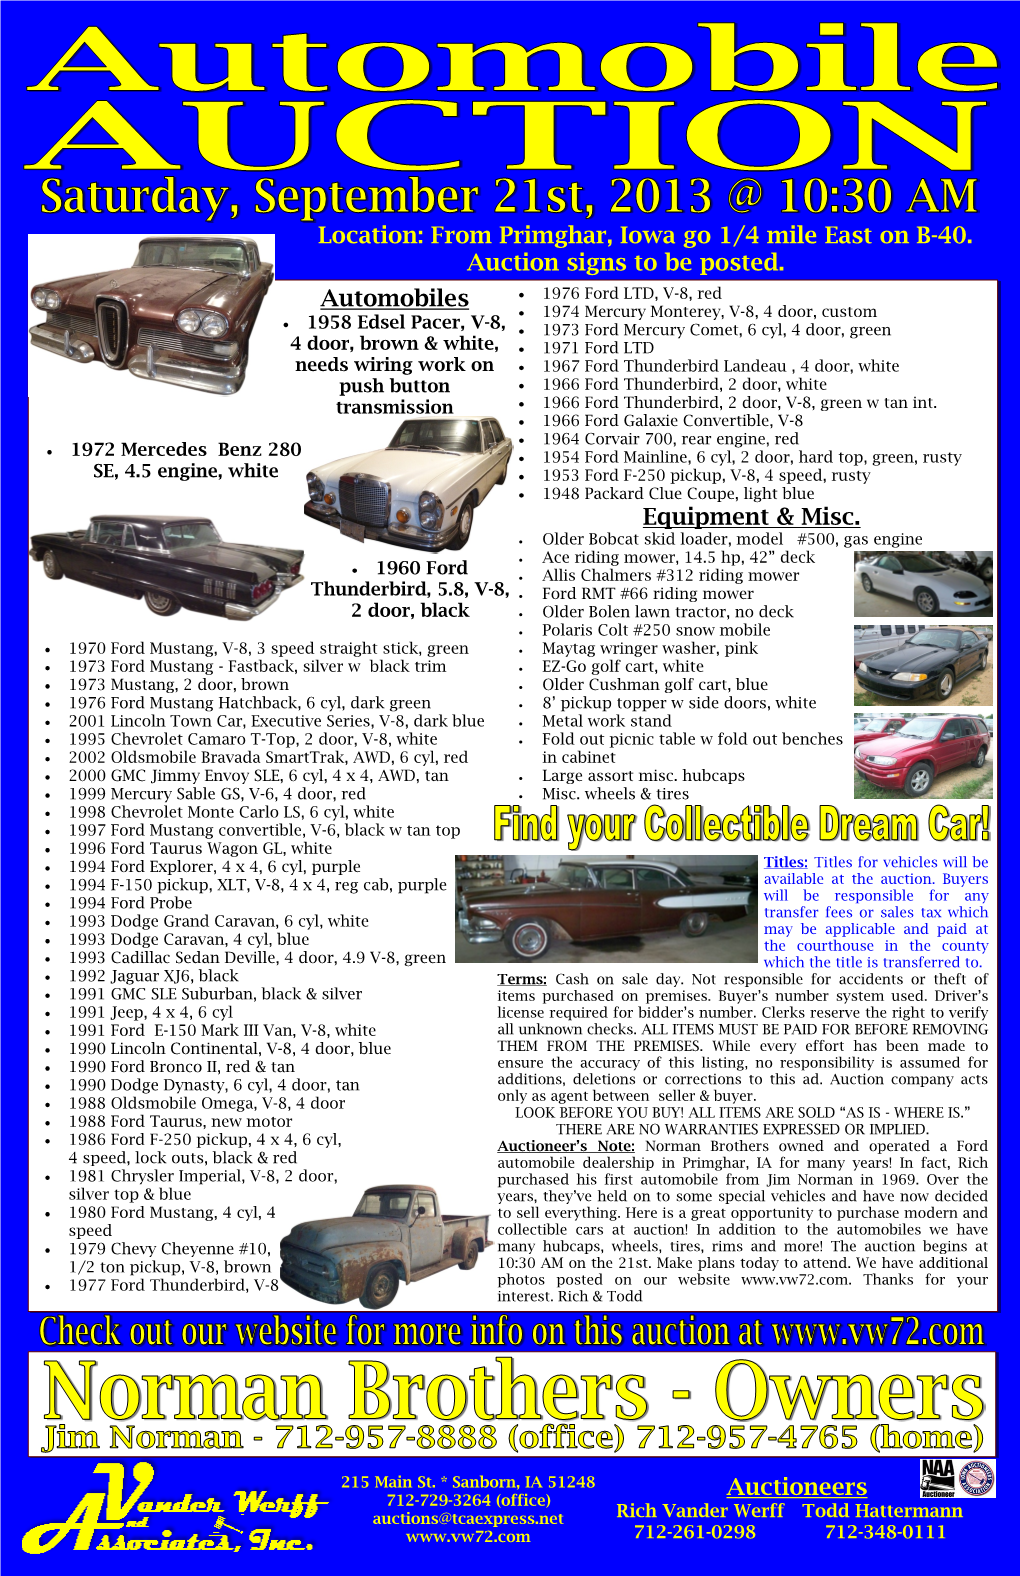 Location: from Primghar, Iowa Go 1/4 Mile East on B-40. Auction Signs to Be Posted. Auctioneers Automobiles Equipment &